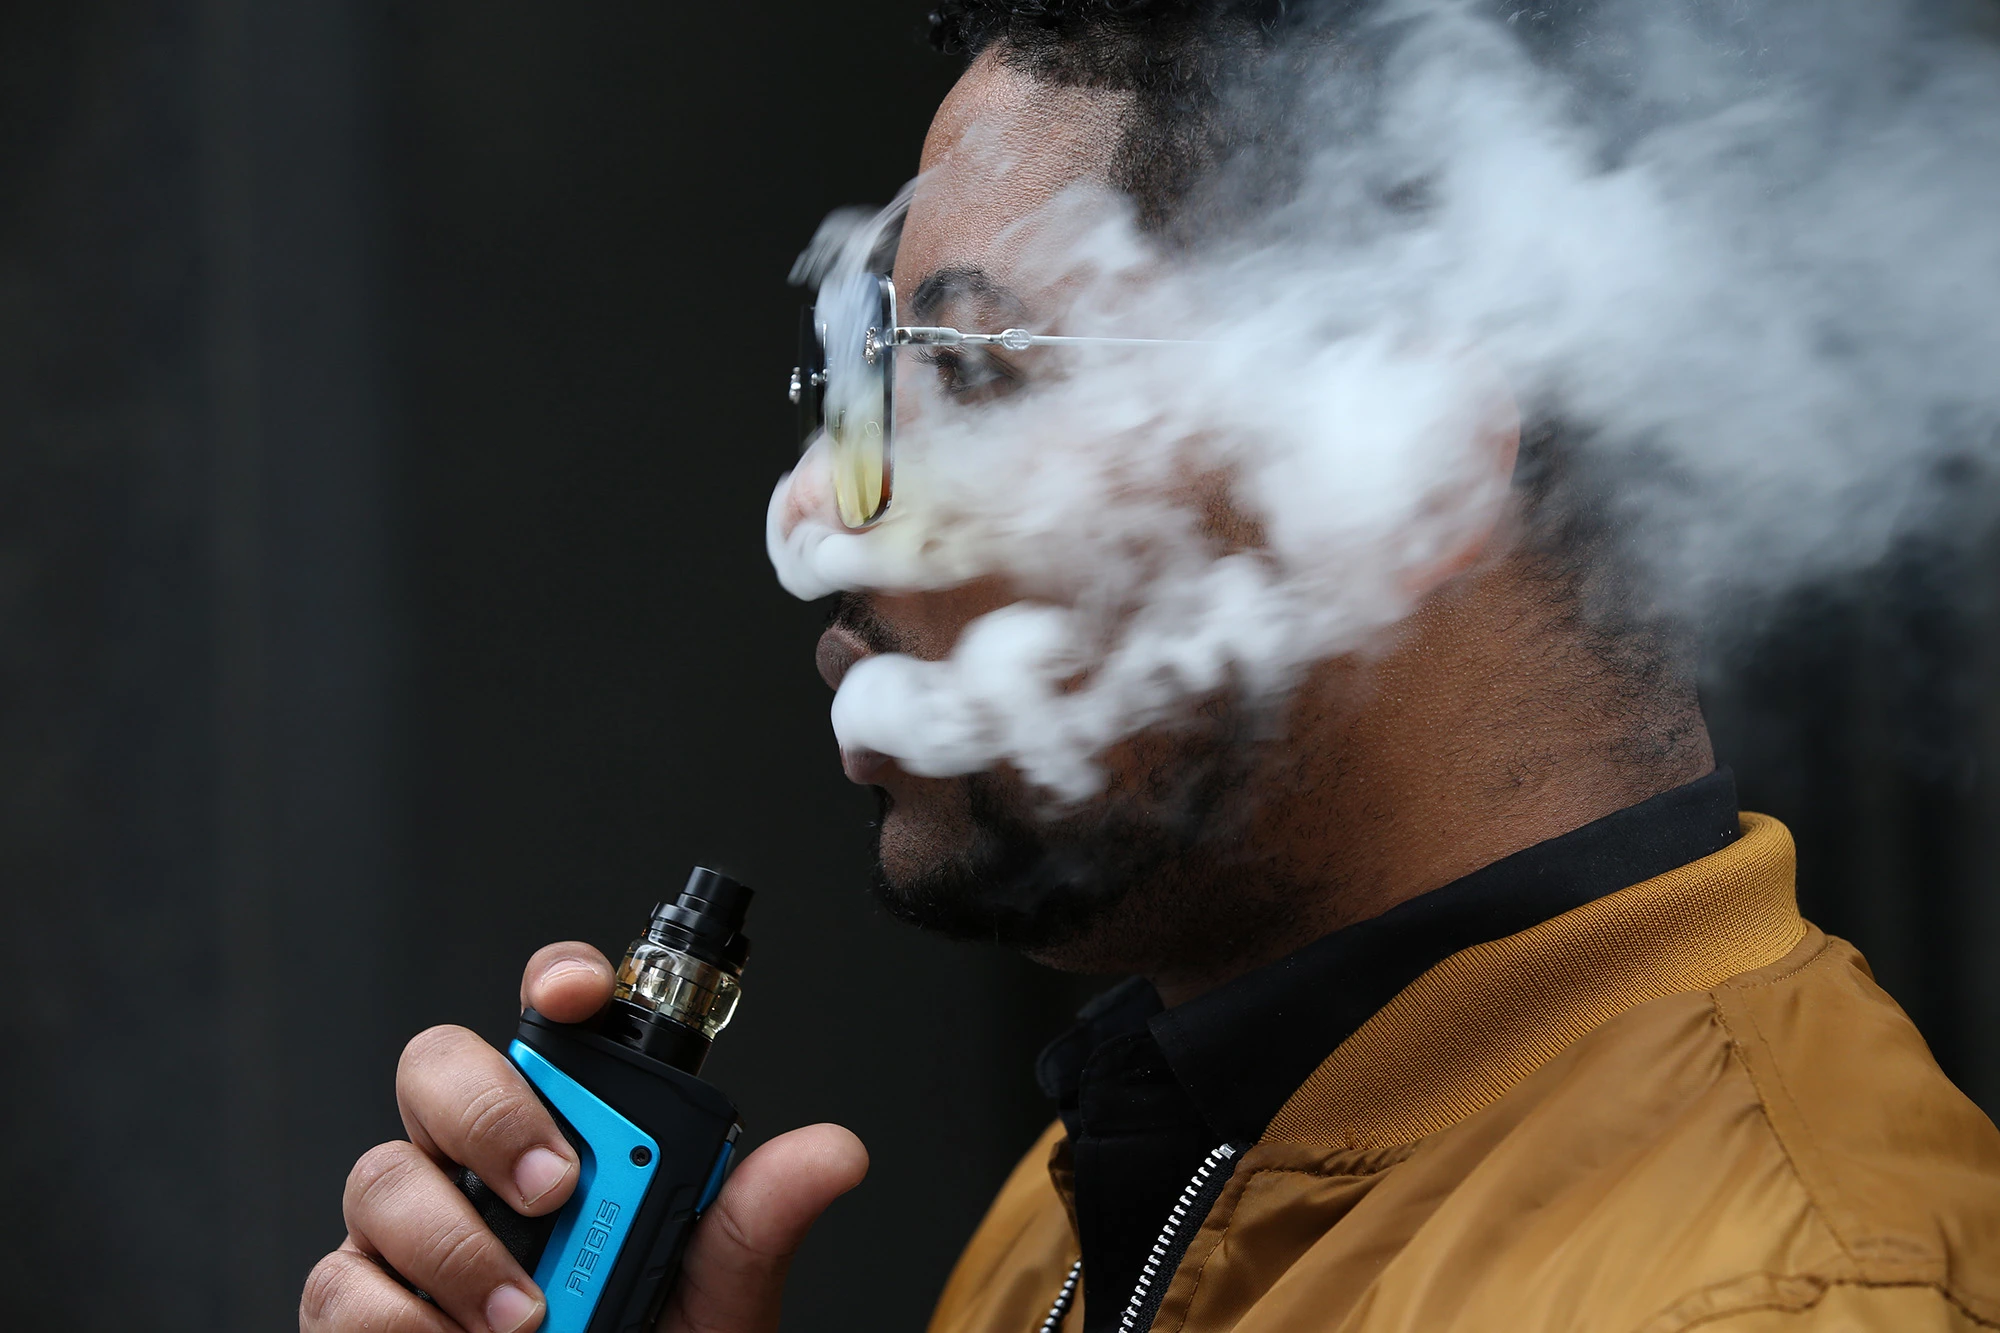 Frankie Paulino, of Chicago, uses his vaping device at Dearborn and Jackson in Chicago, Monday, Sept. 16, 2019. Paulino believes excessive vaping is bad and prefers the mint flavor. (Antonio Perez/Chicago Tribune/Tribune News Service via Getty Images)